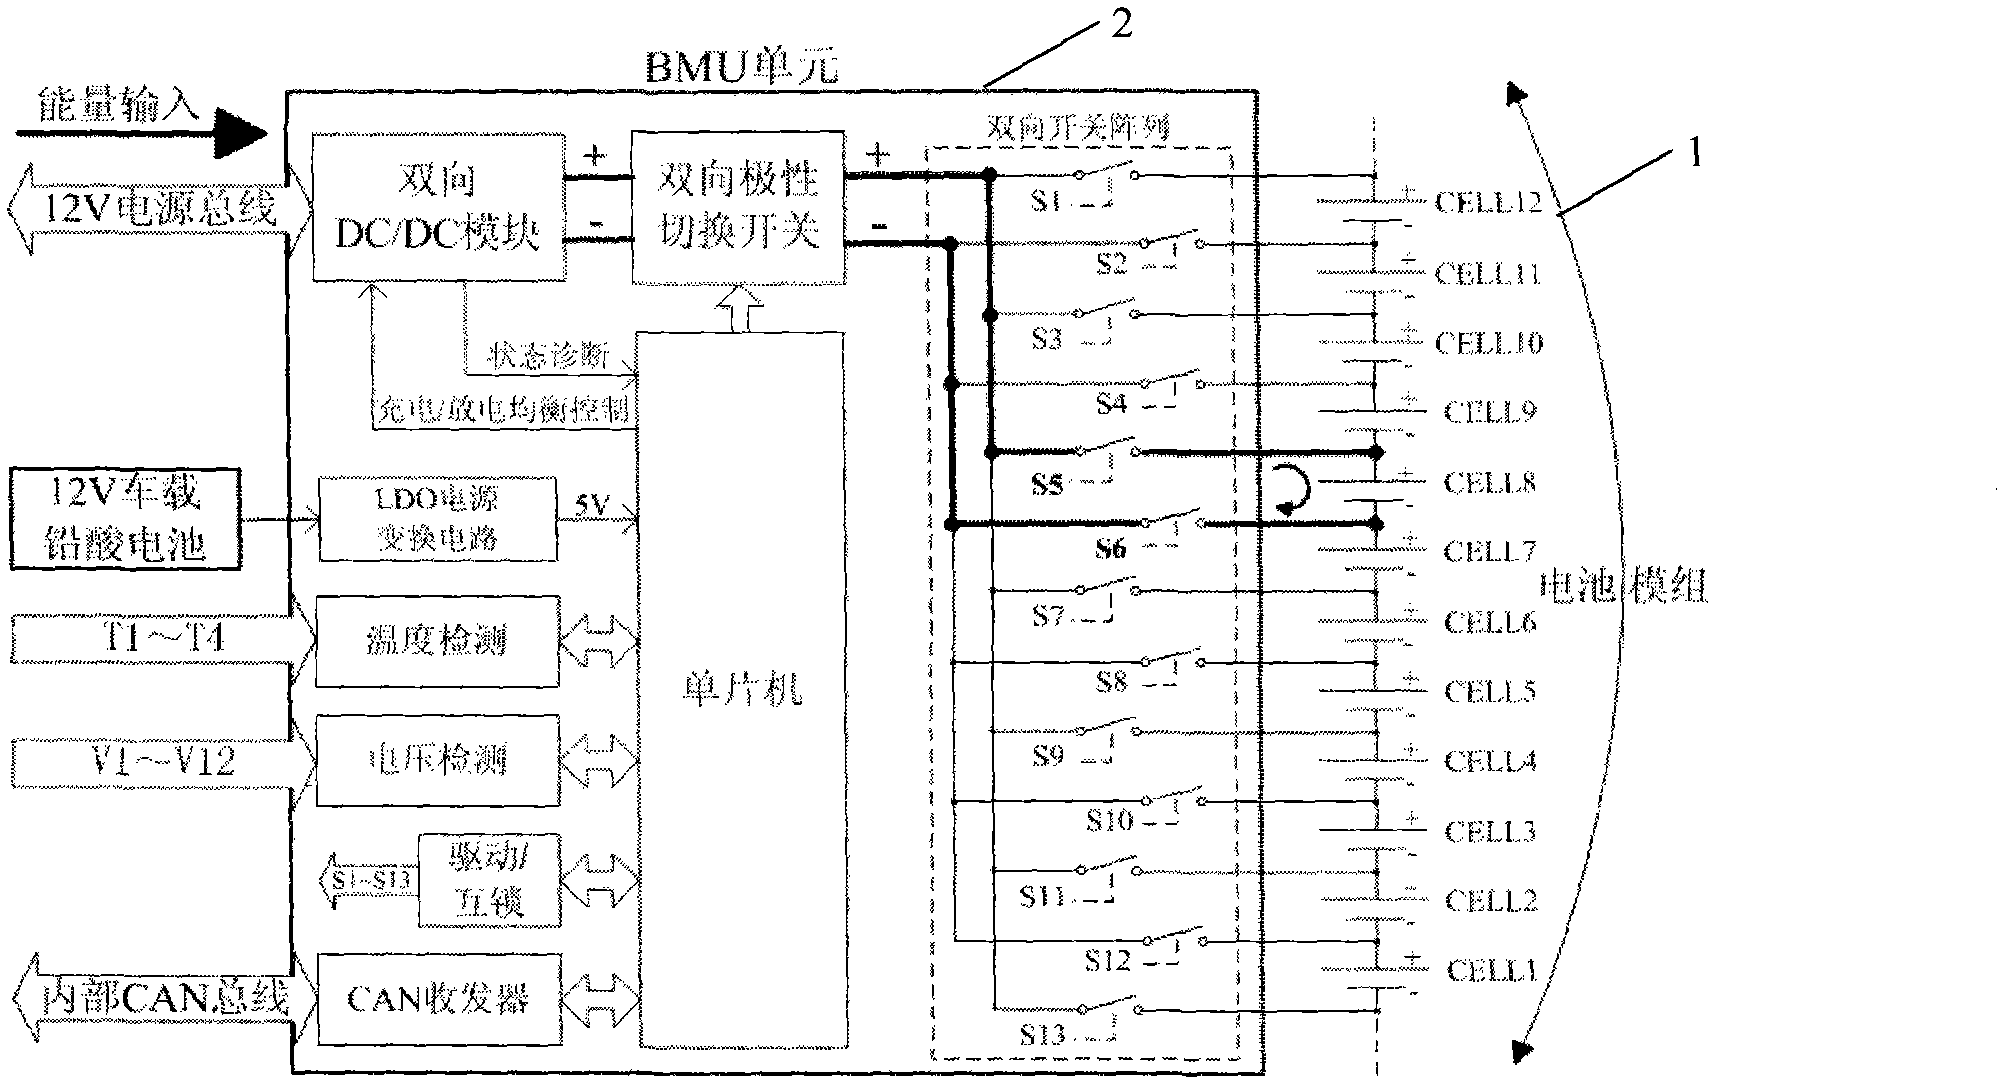 Cell equalization system based on bidirectional DC/DC